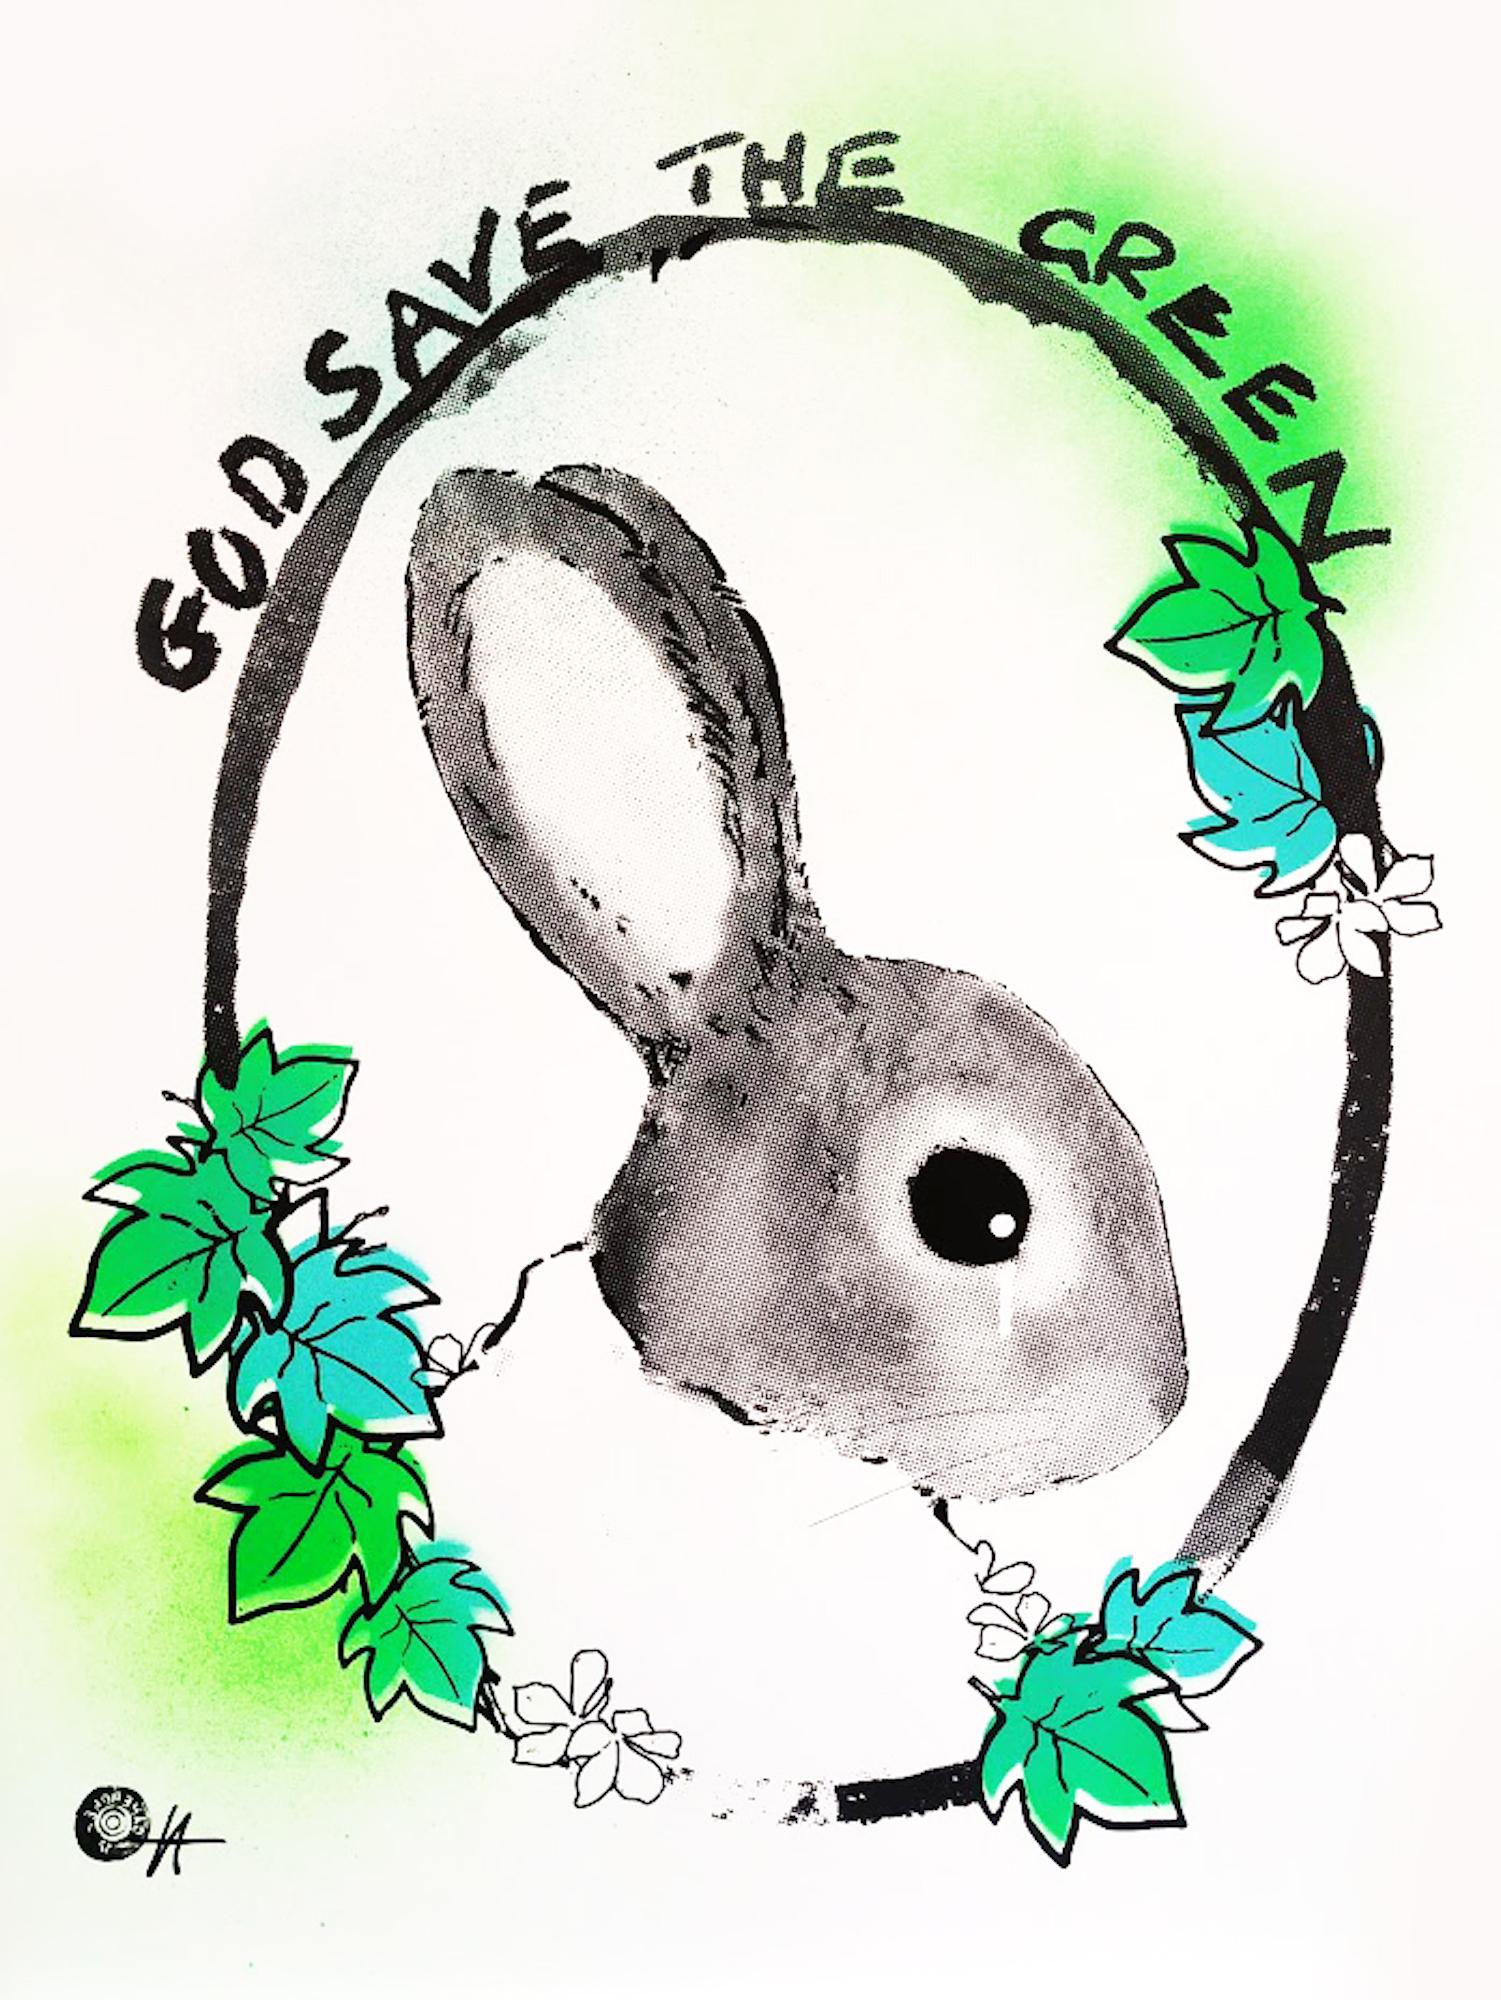 God Save The Green is a limited edition silkscreen print Harry Bunce. Bunce has poignantly decided to add a tear to the face of the rabbit evoking deeper thoughts as to the topic of rural conservation.
Harry Bunce is available online and in our